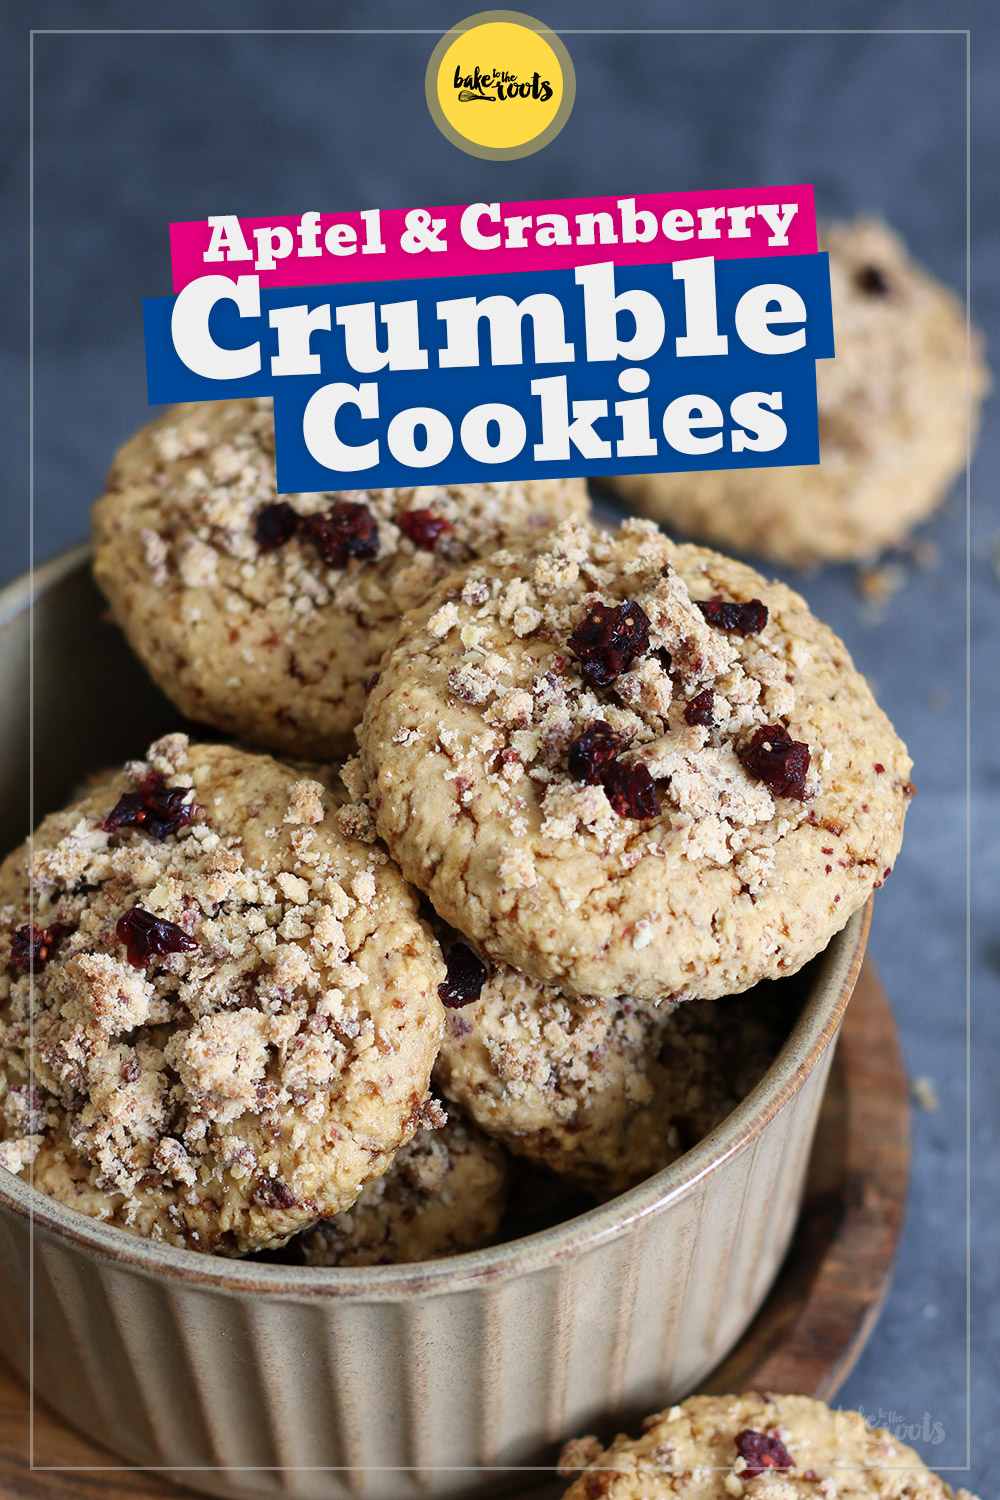 Apfel & Cranberry Crumble Cookies | Bake to the roots